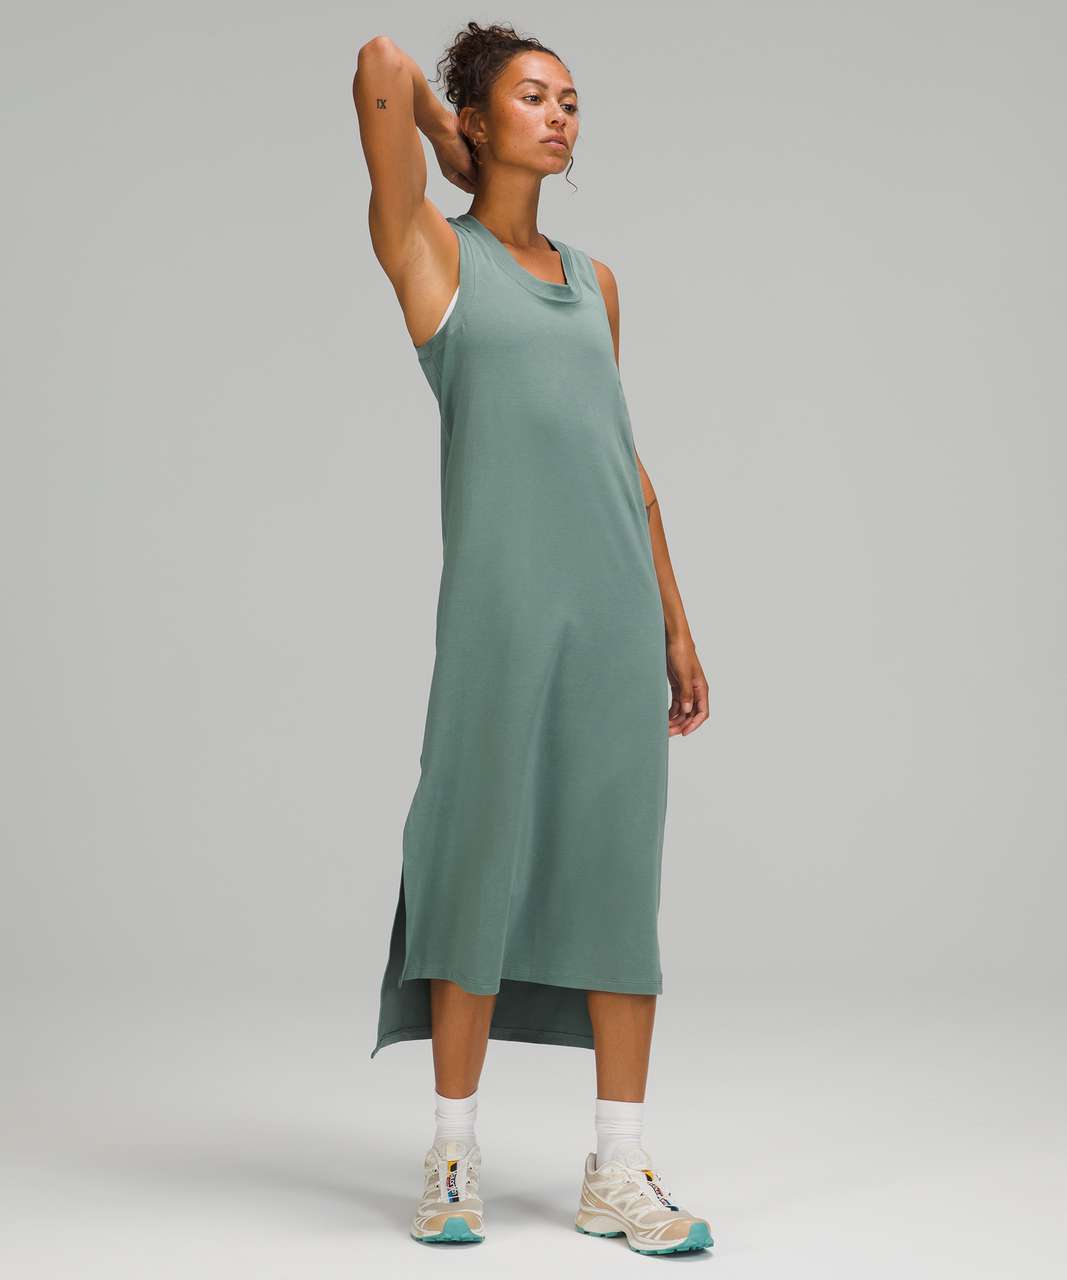 Lululemon All Yours Tank Maxi Dress - Tidewater Teal